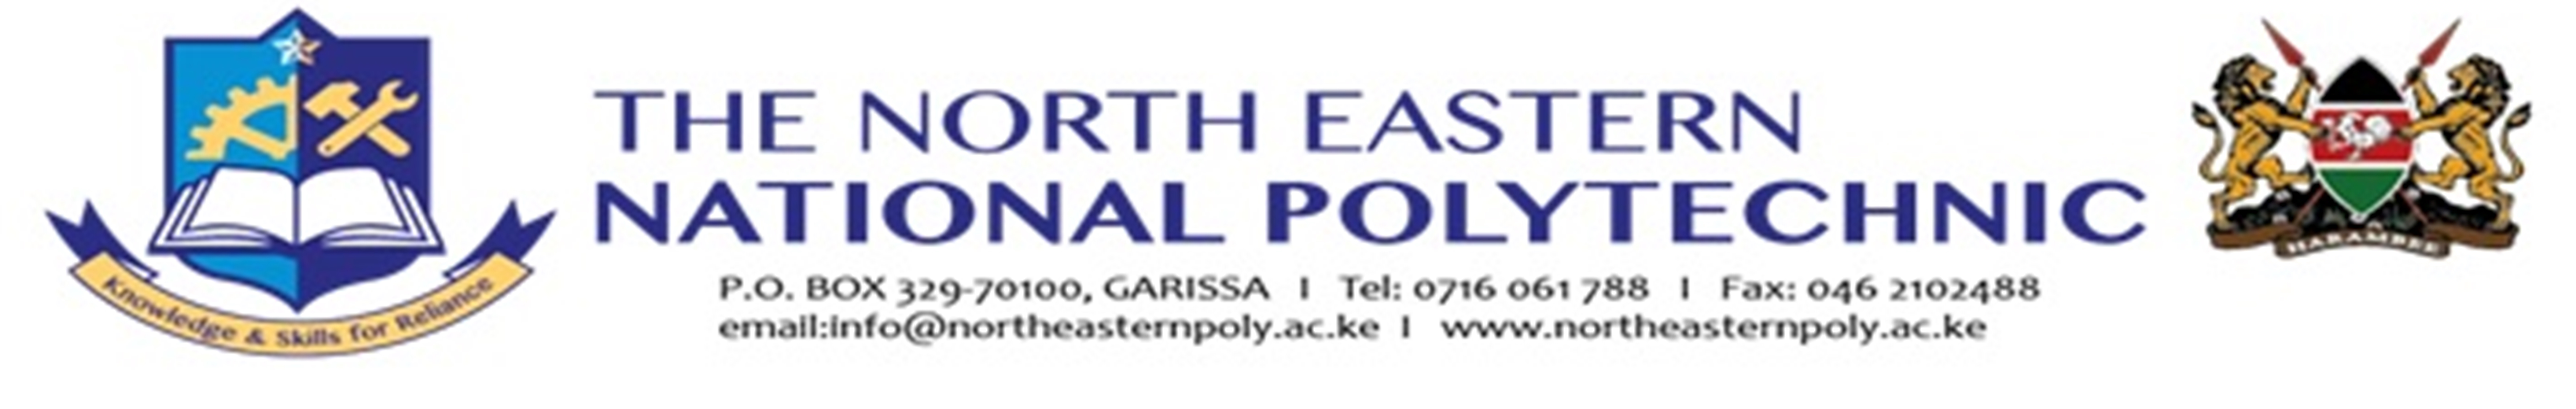 North Eastern National Polytechnic